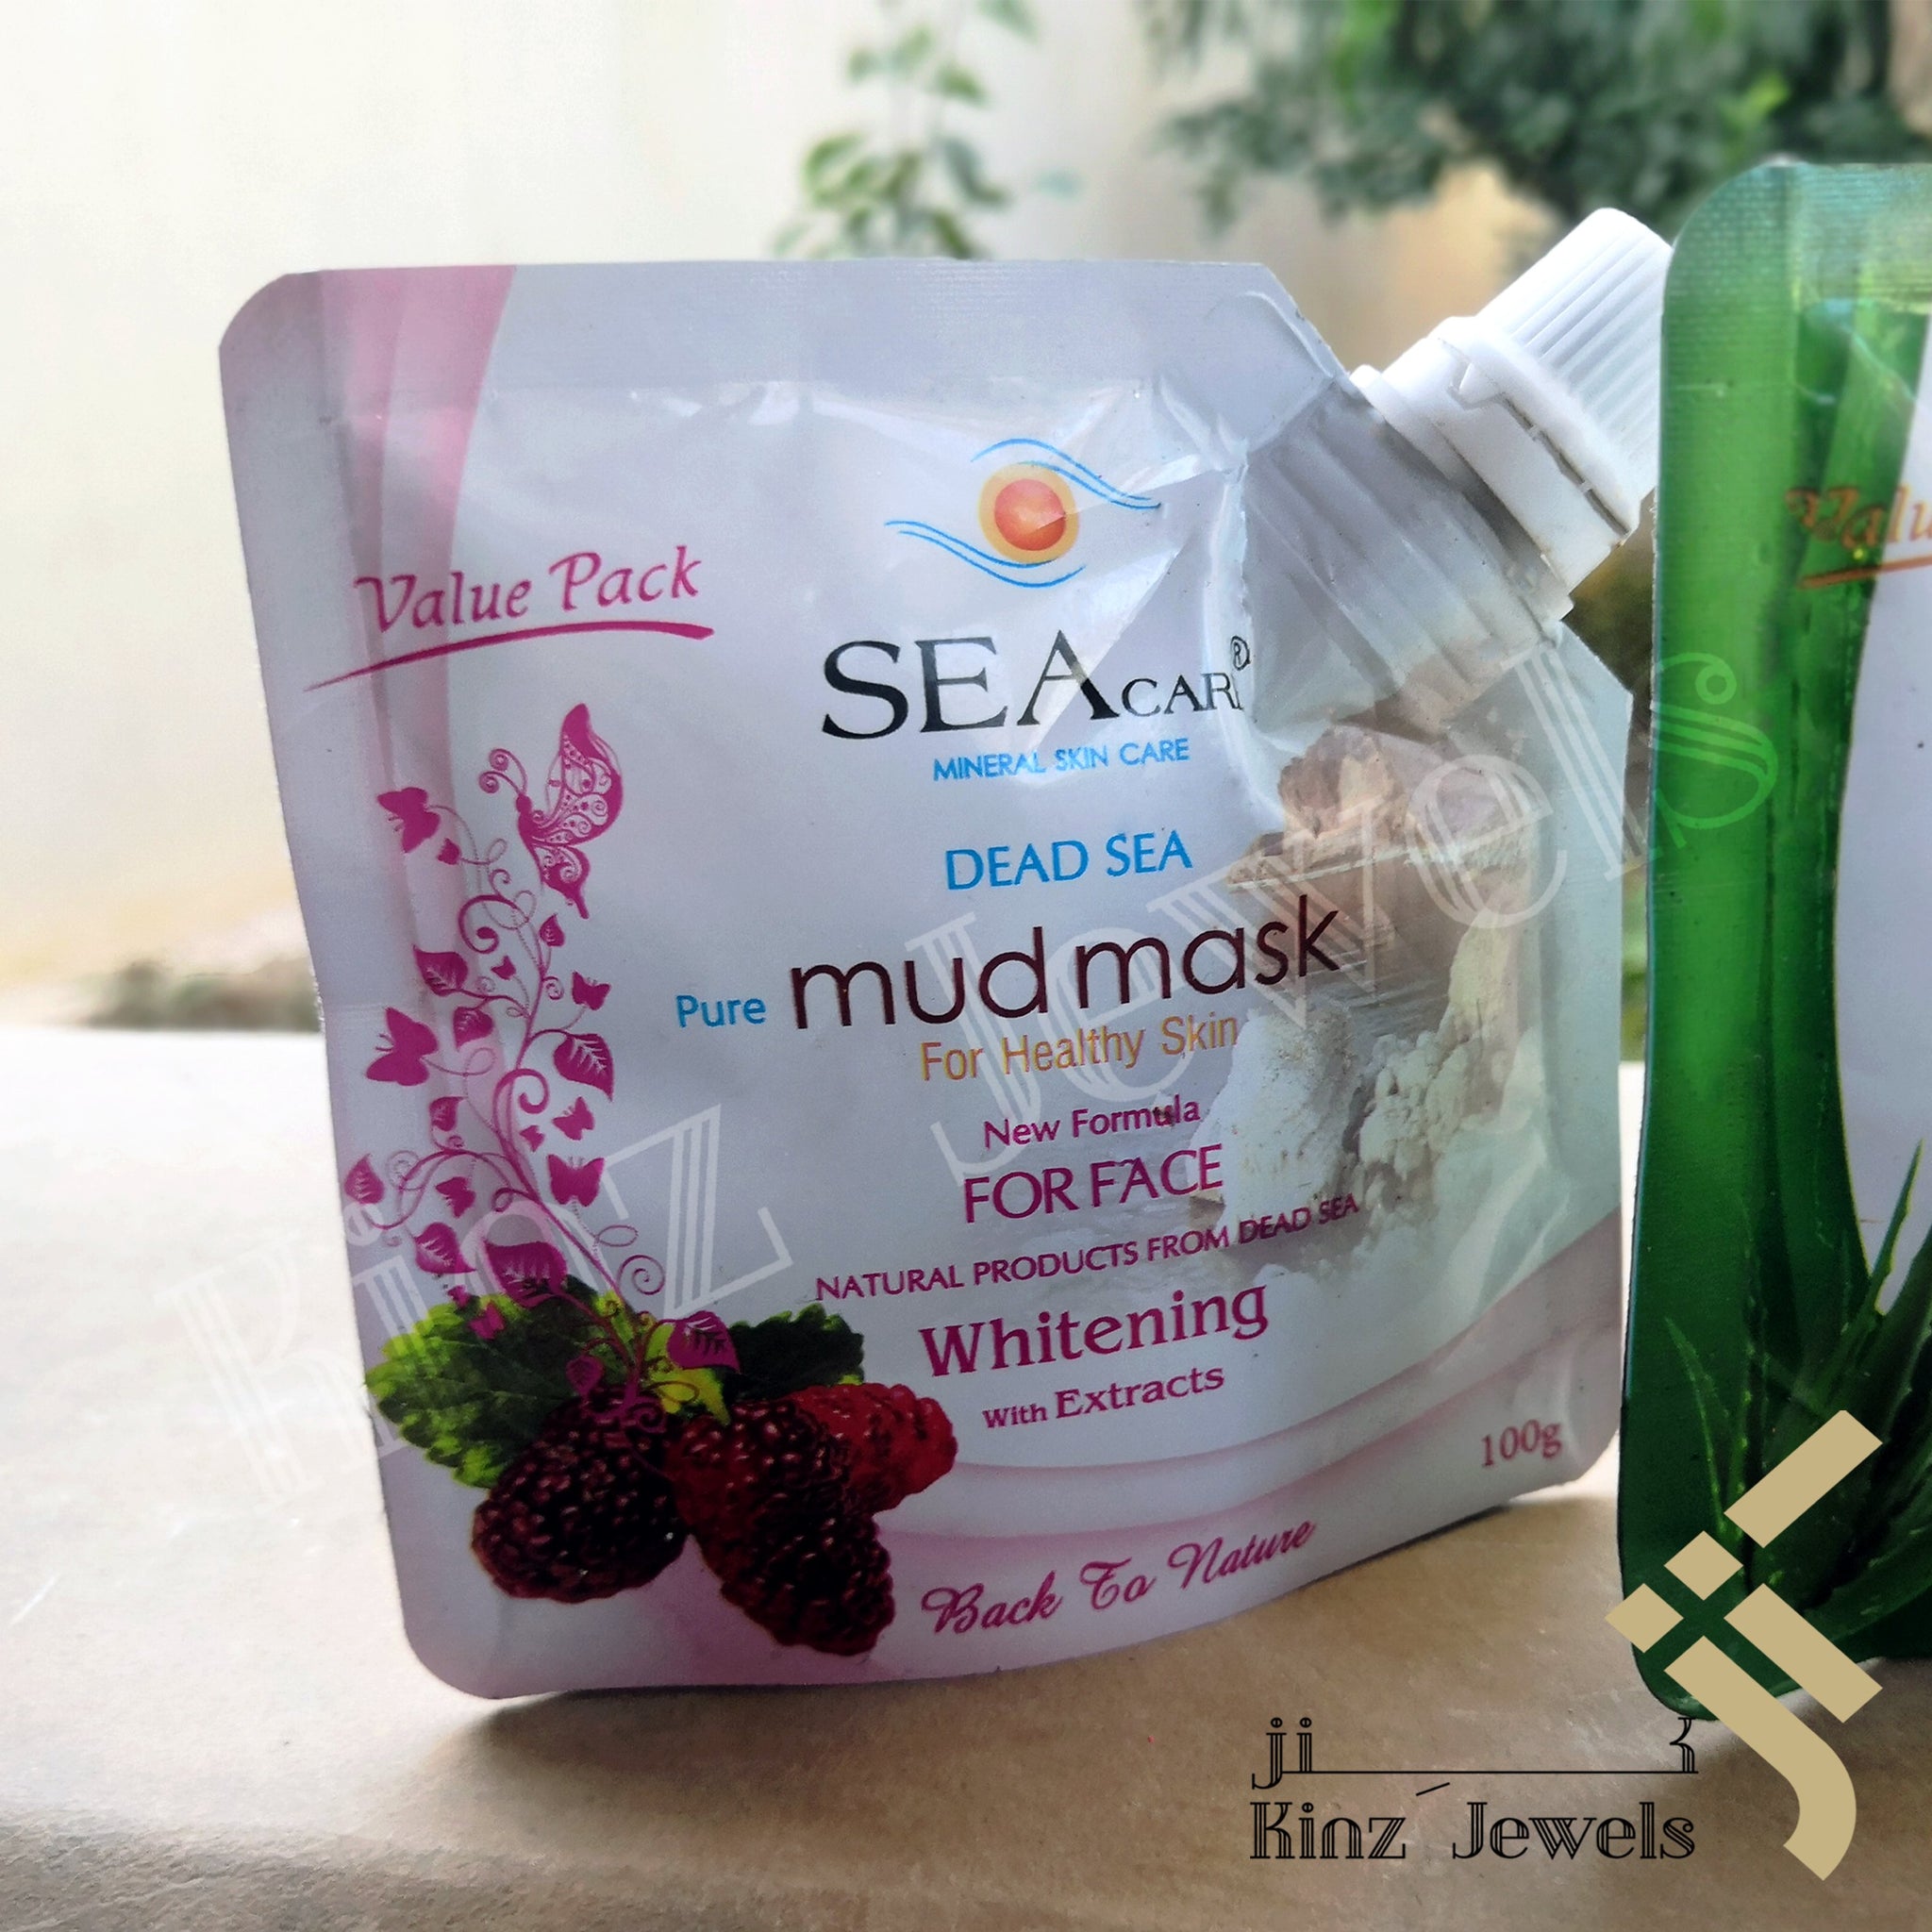 kinzjewels - Dead Sea Pure Mulberry Mud Mask For Healthy Skin Natural Whitening Face